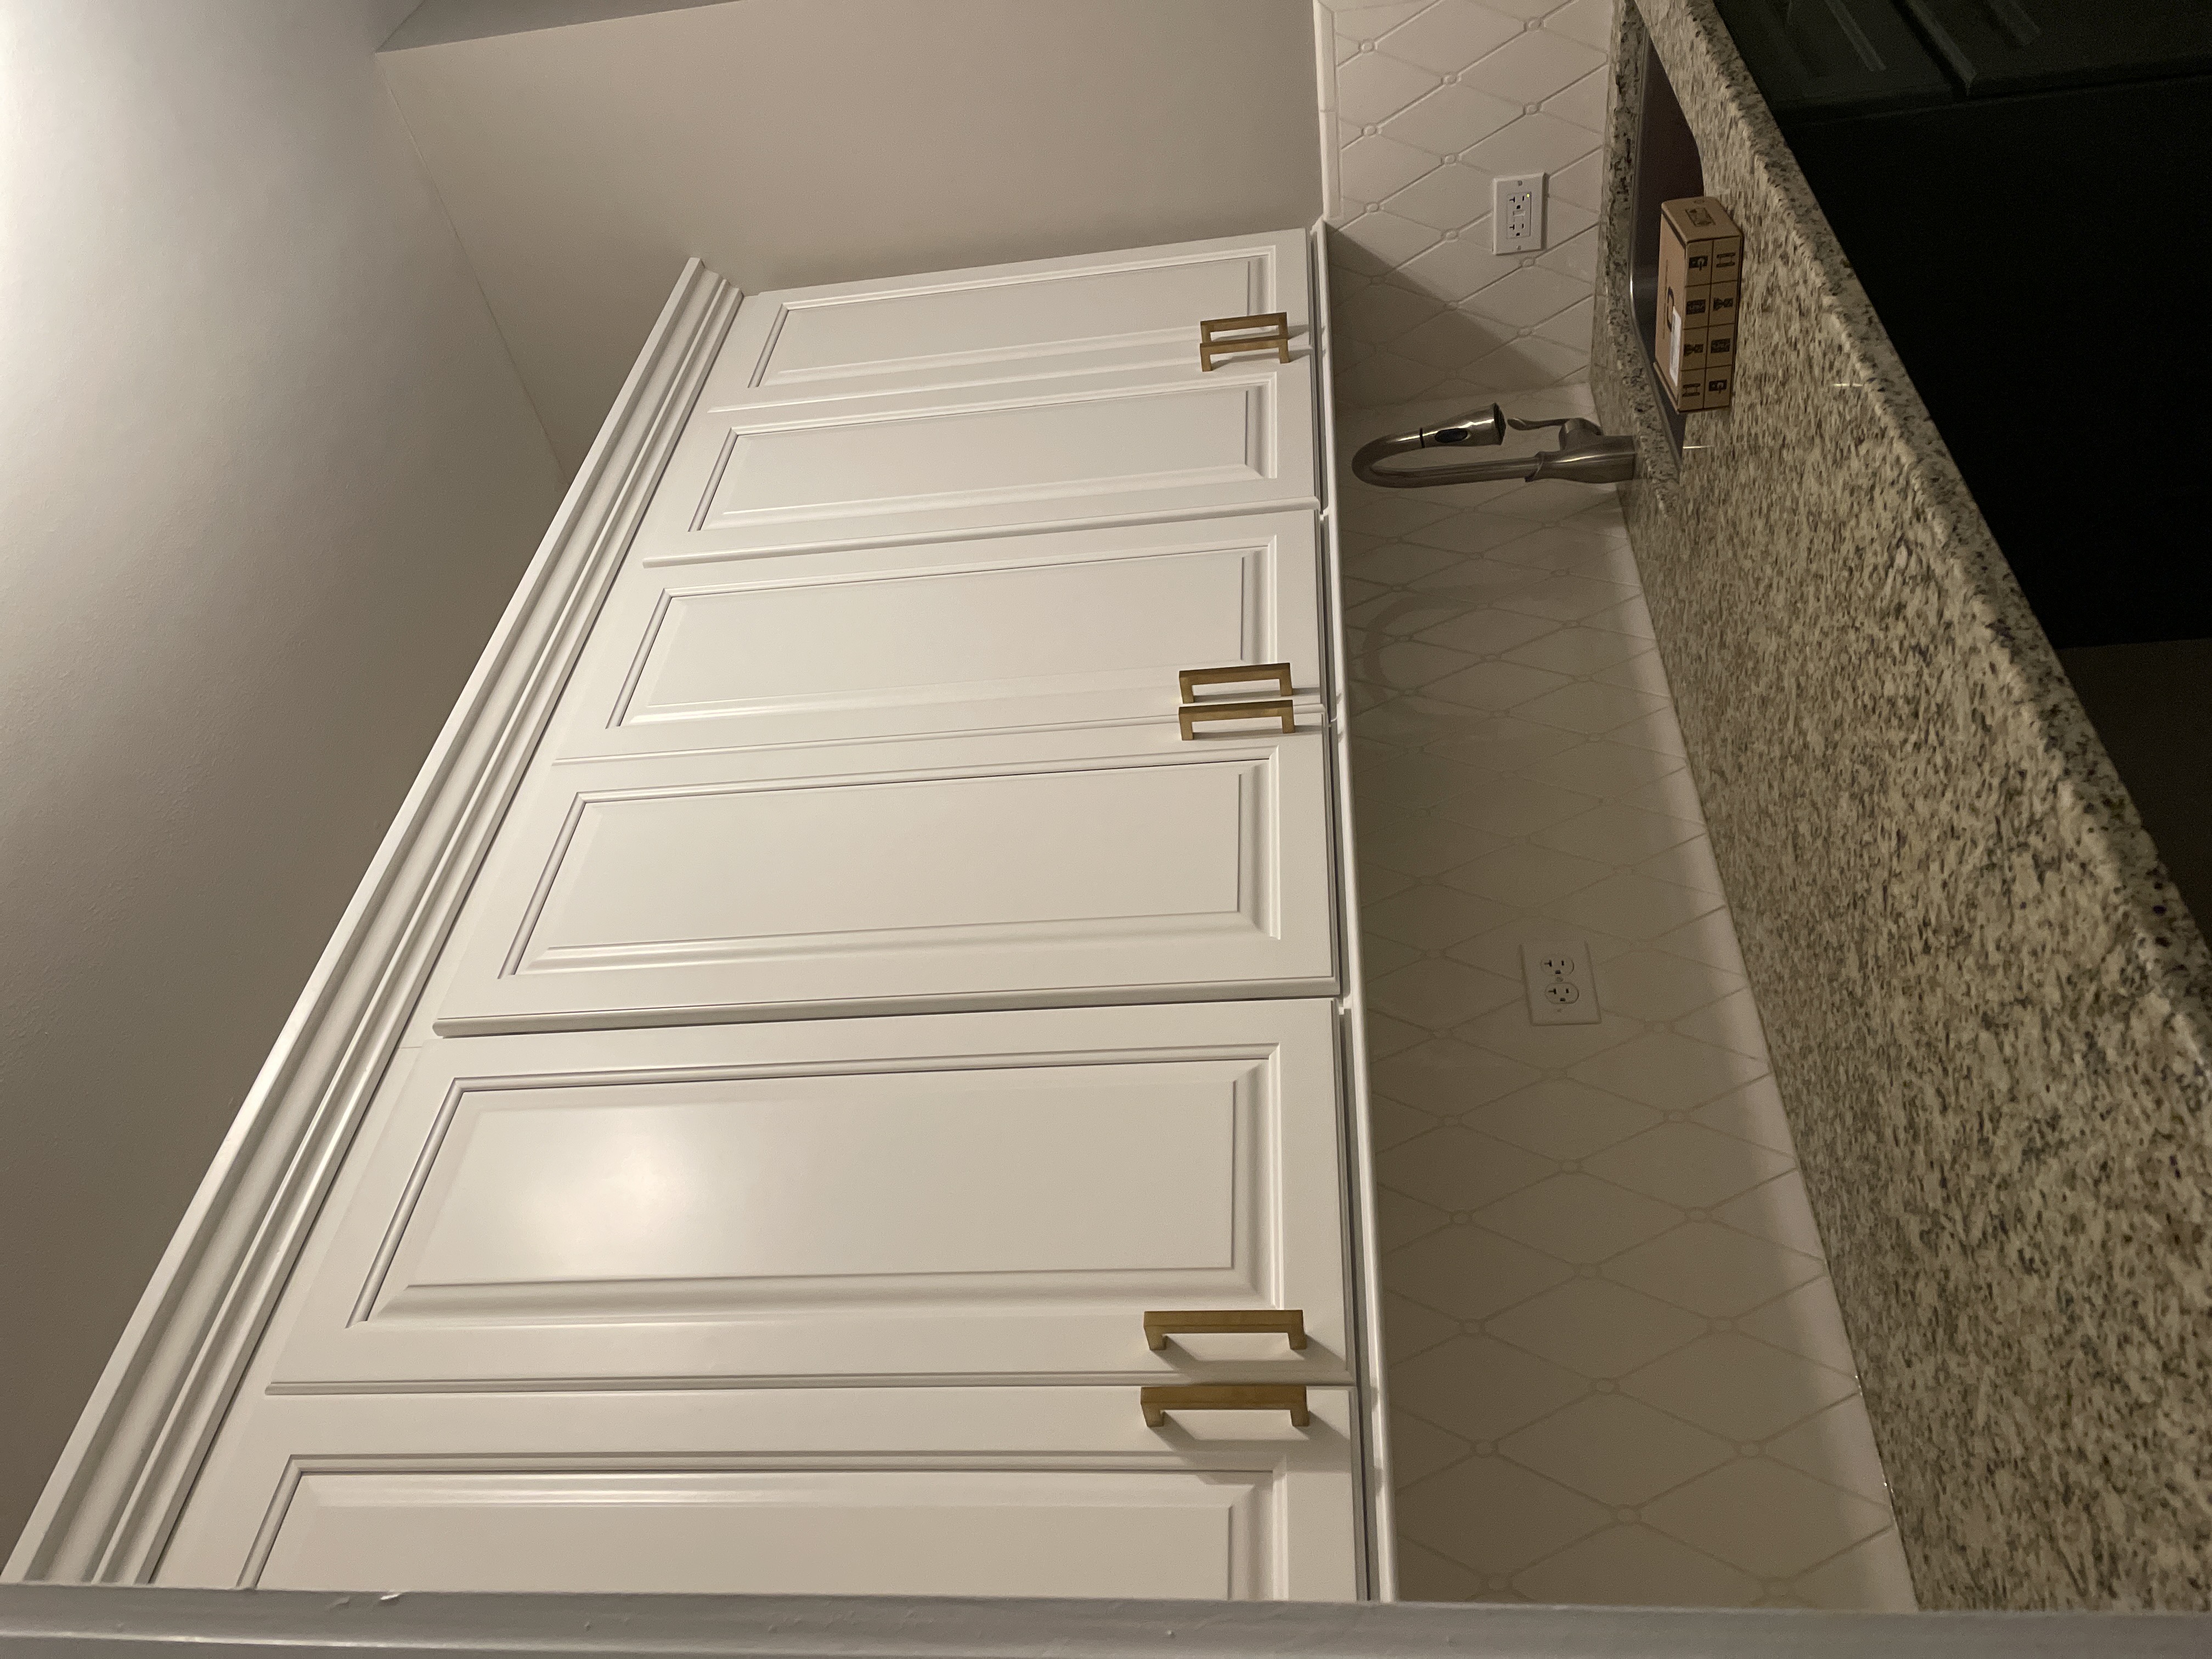 High End Quality Kitchen Cabinet Painting Services in Kildeer, IL.